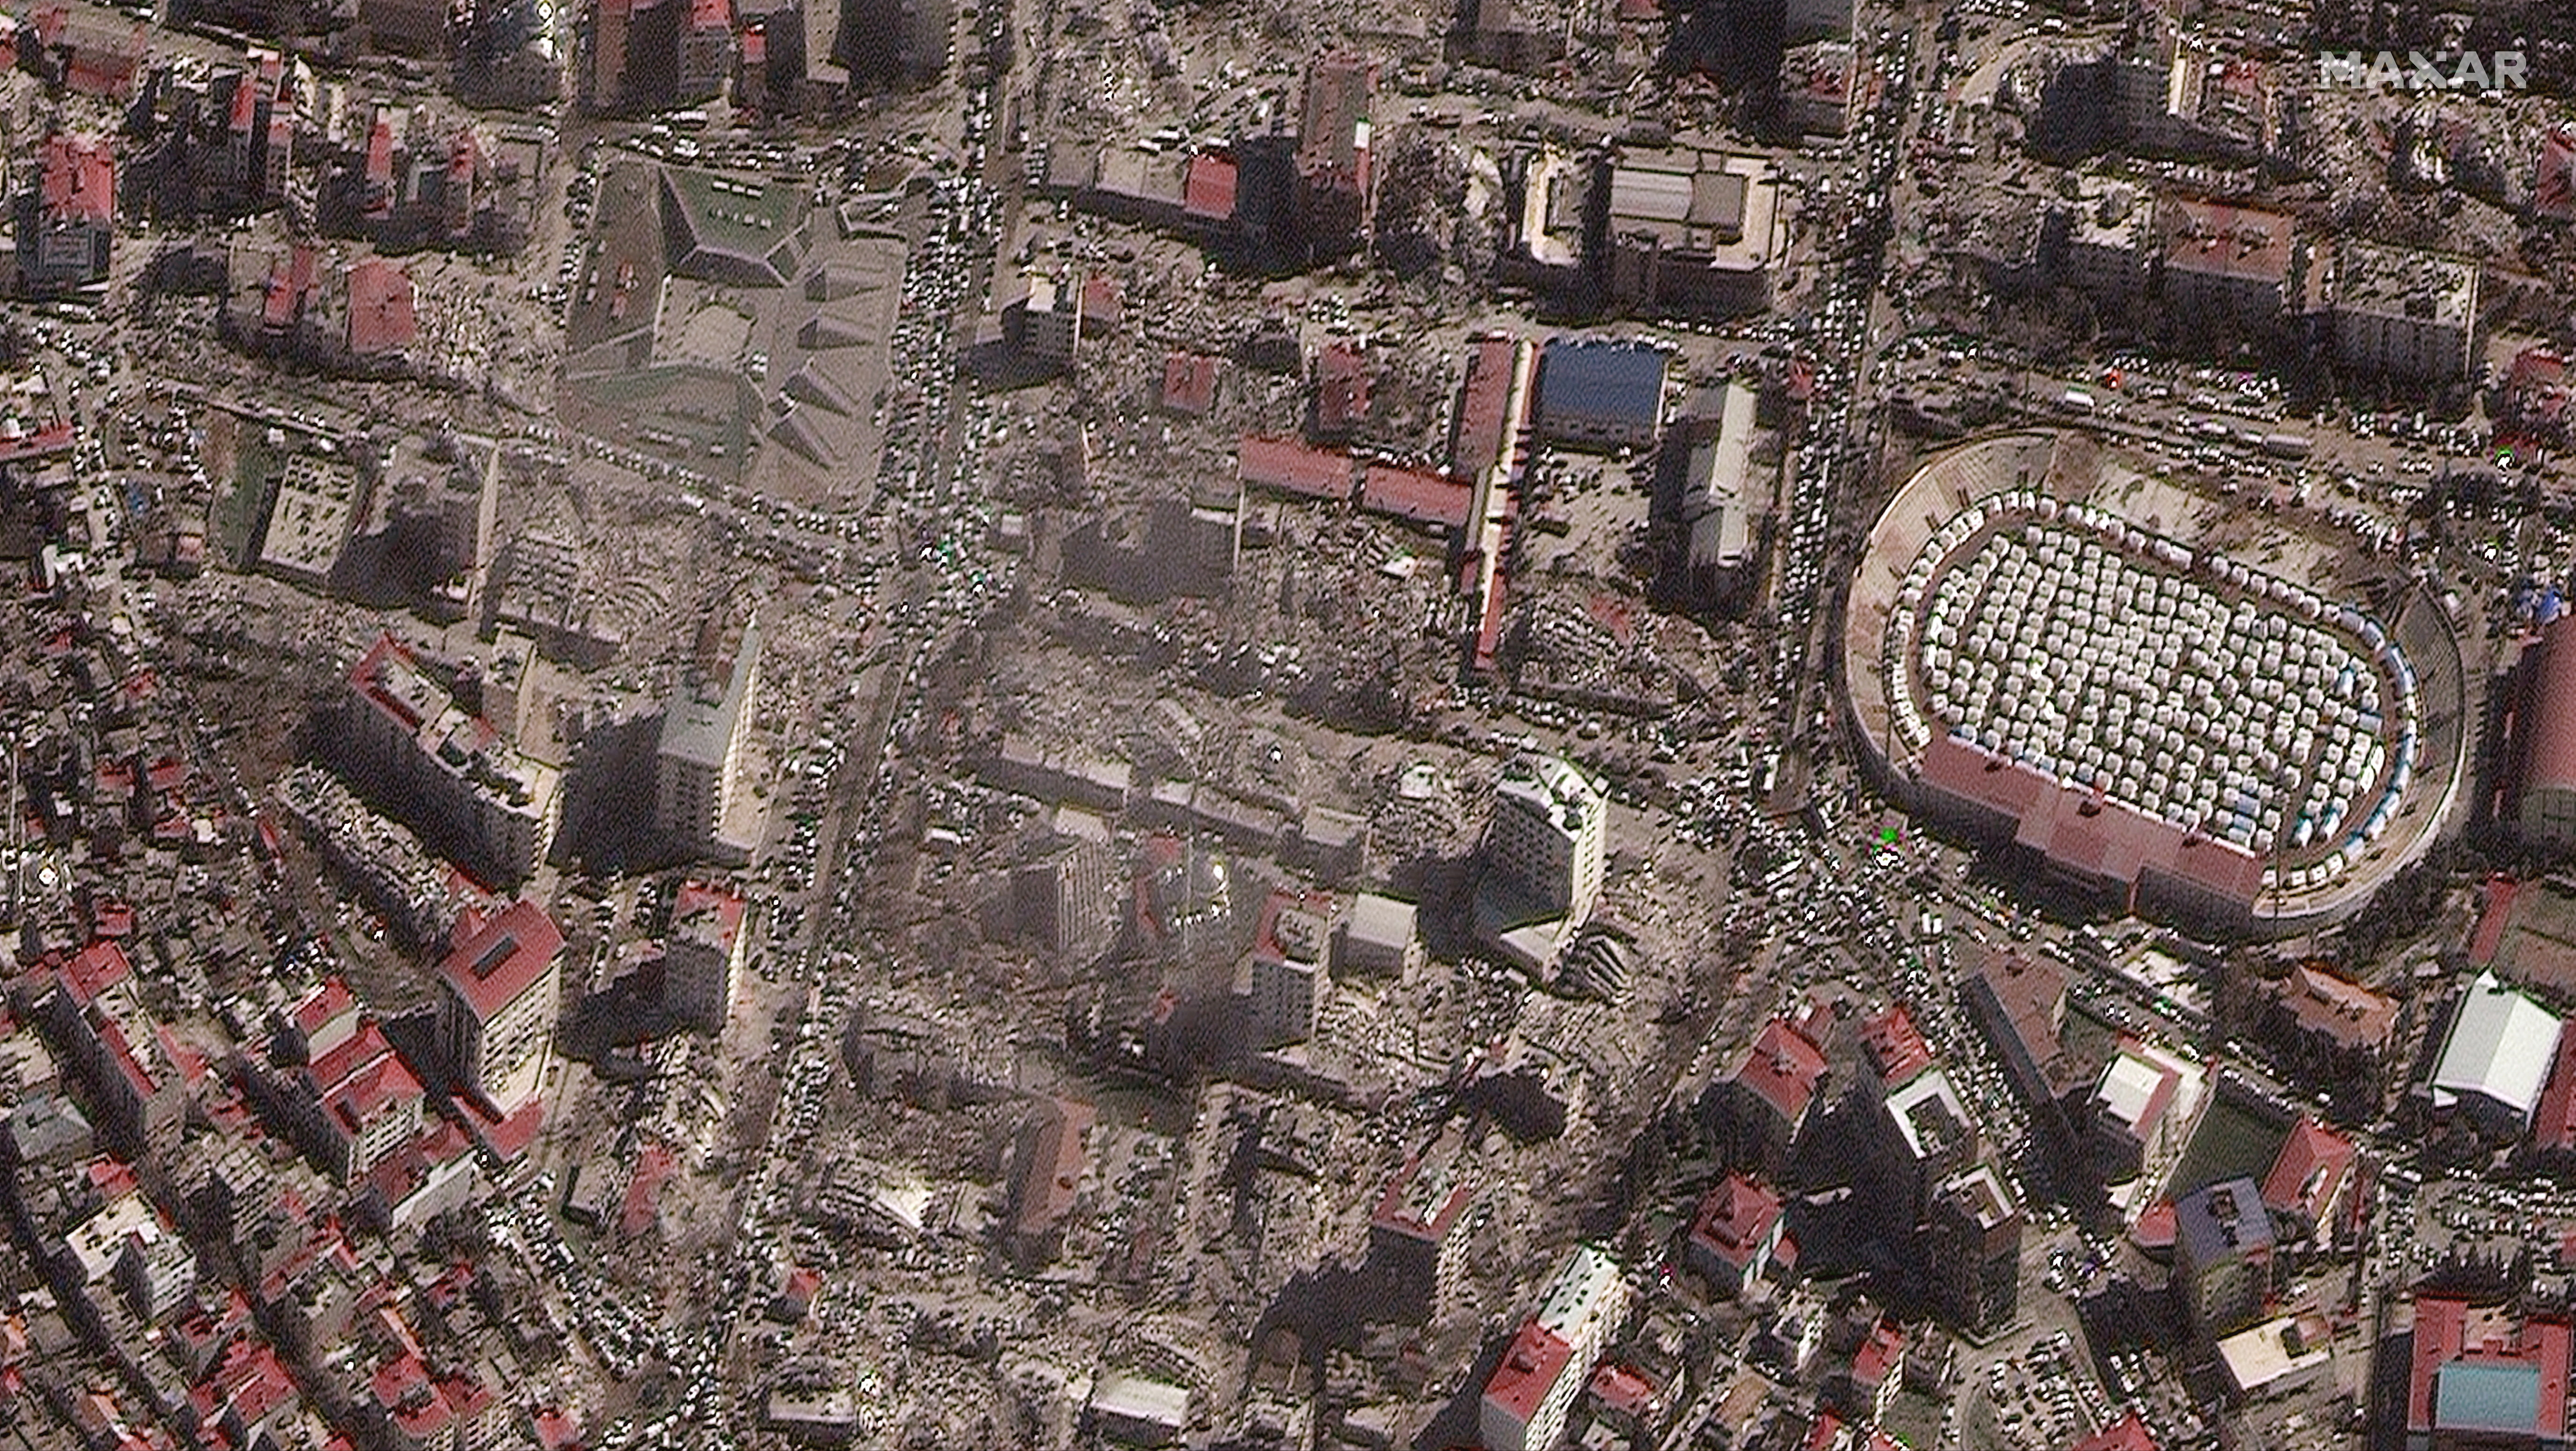 A satellite image shows destroyed buildings and emergency shelters in a stadium after an earthquake in Kahramanmaras